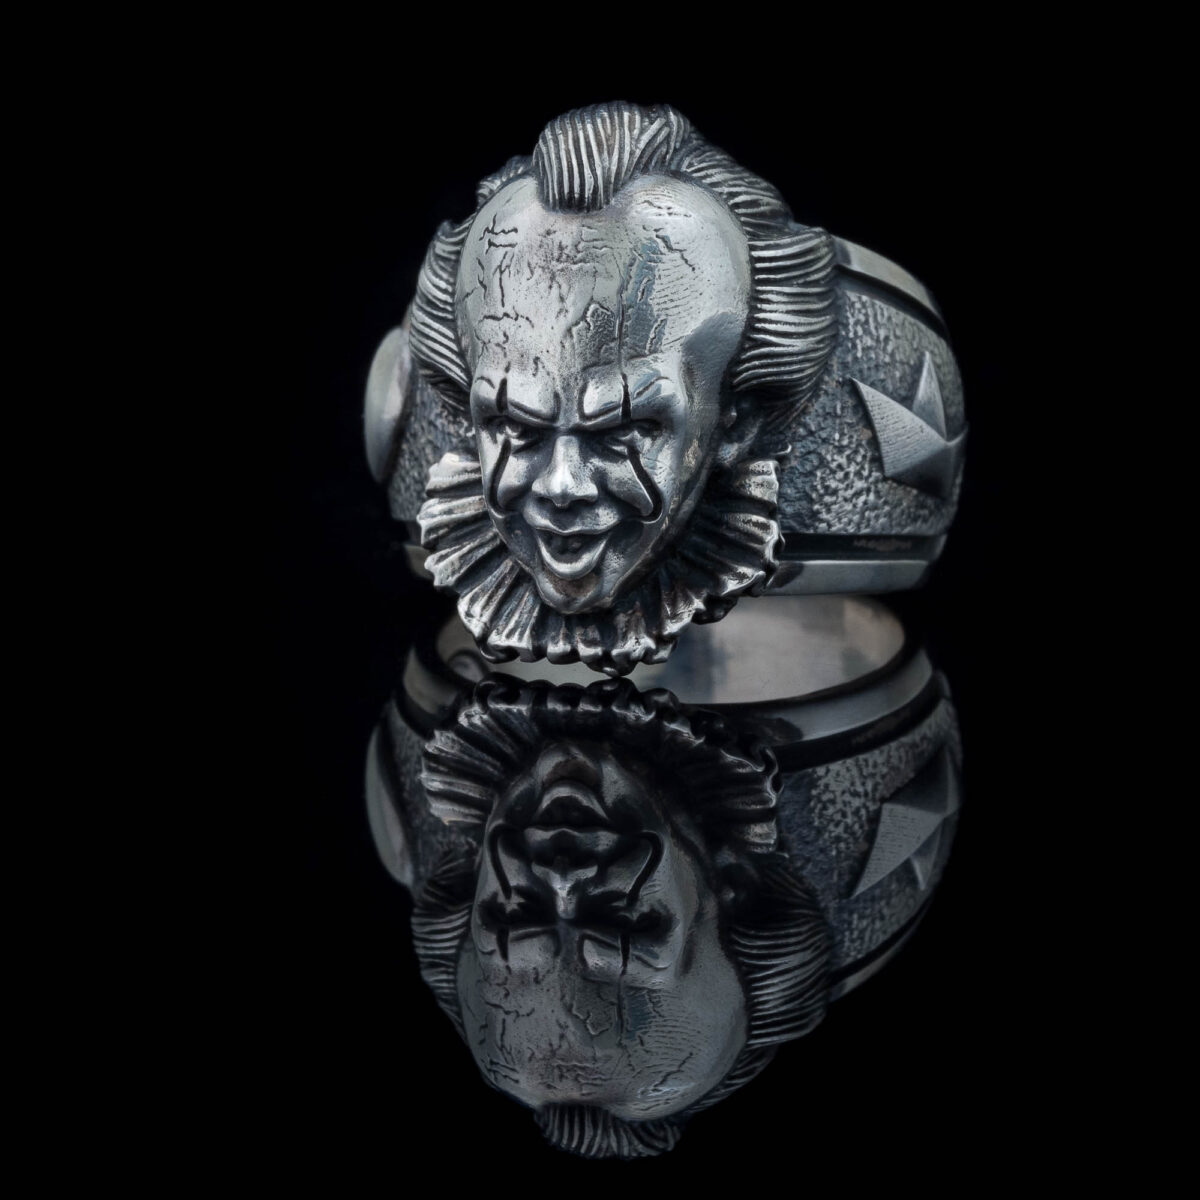 Pennywise Clown 2017 Horror Ring